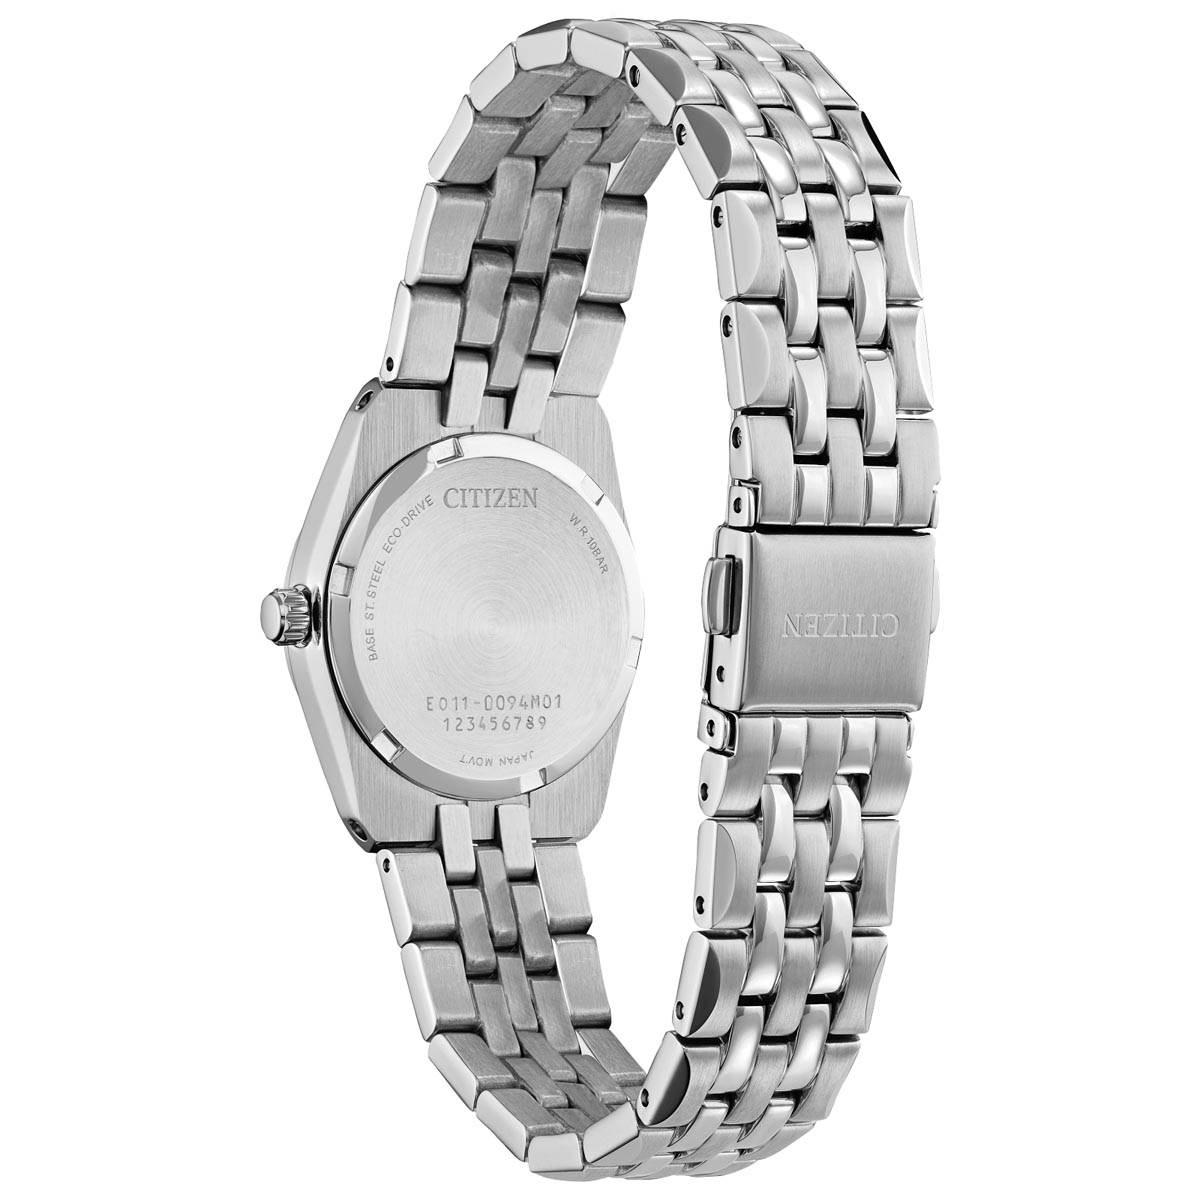 Citizen Corso Womens Diamond Watch with Taupe Dial and Stainless Steel Bracelet (eco drive movement)